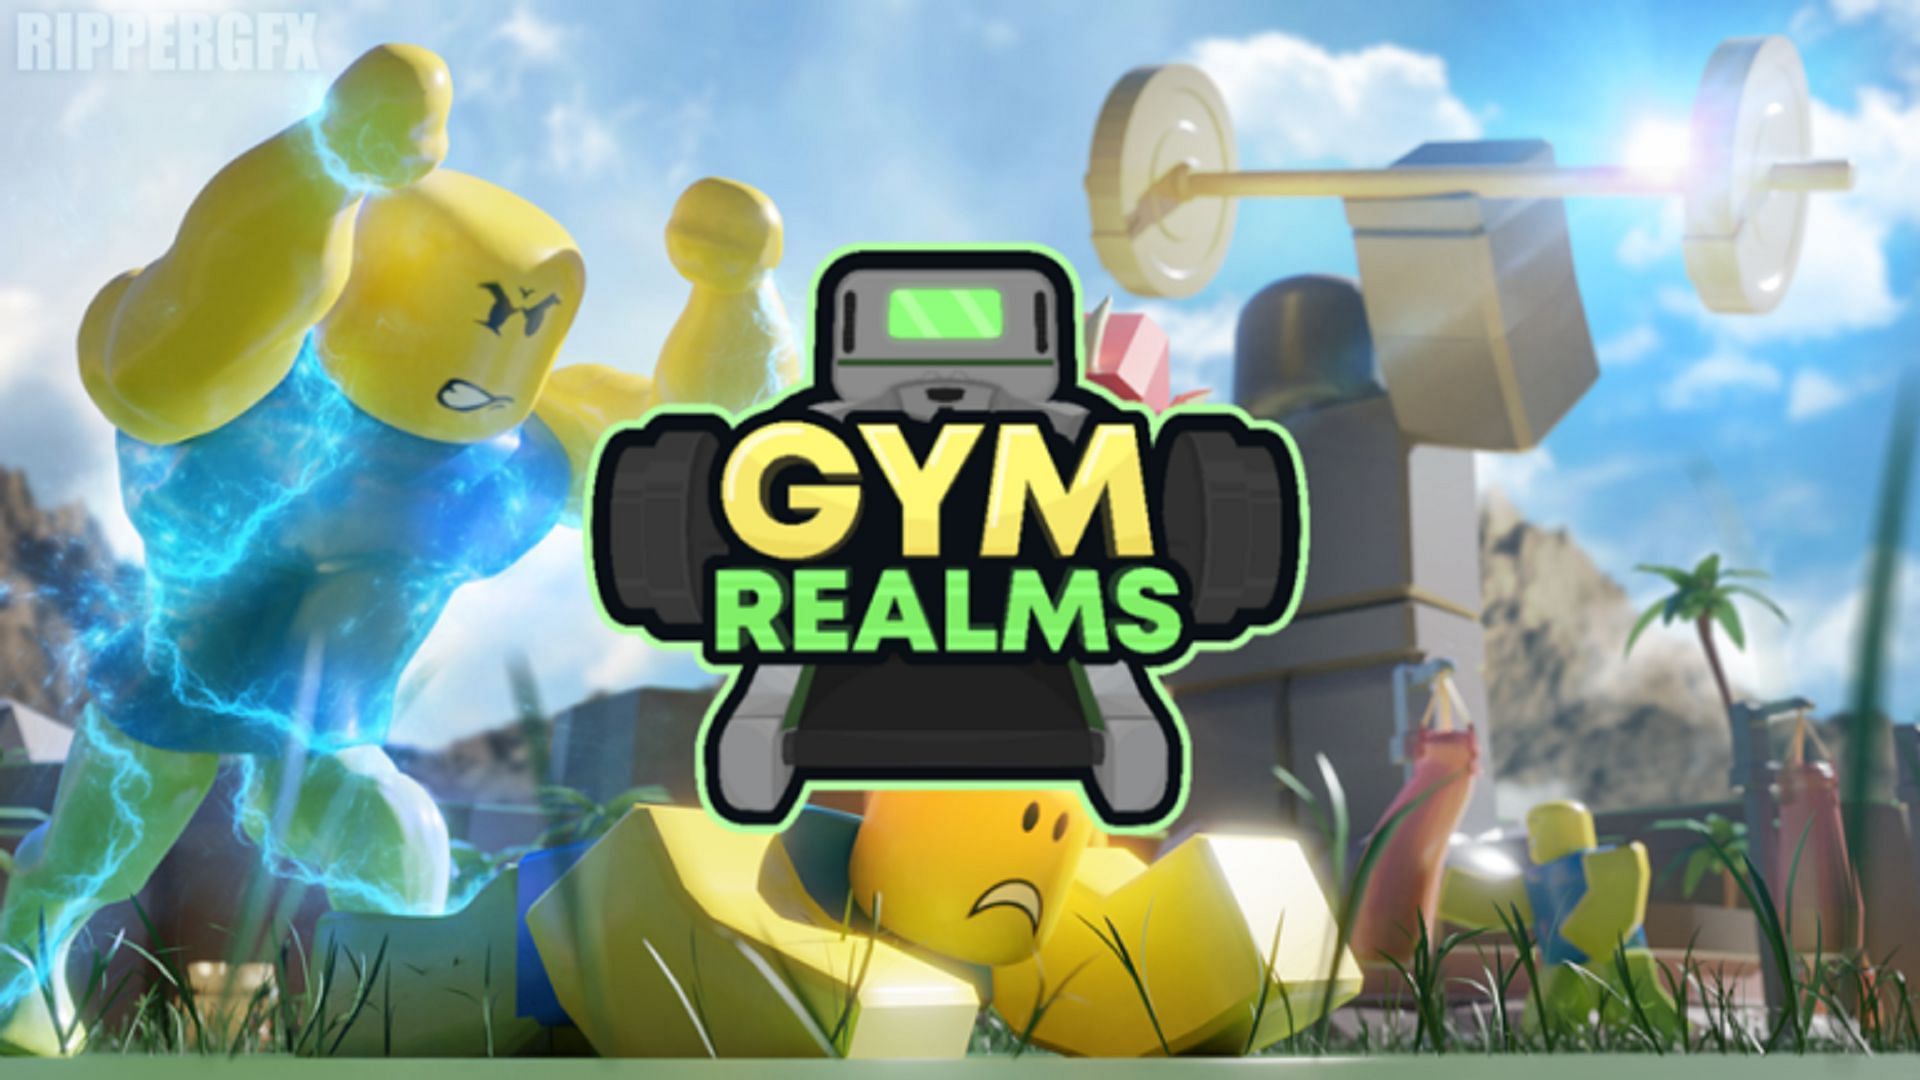 Get stronger and faster with Gym Realms codes (Image via Roblox)